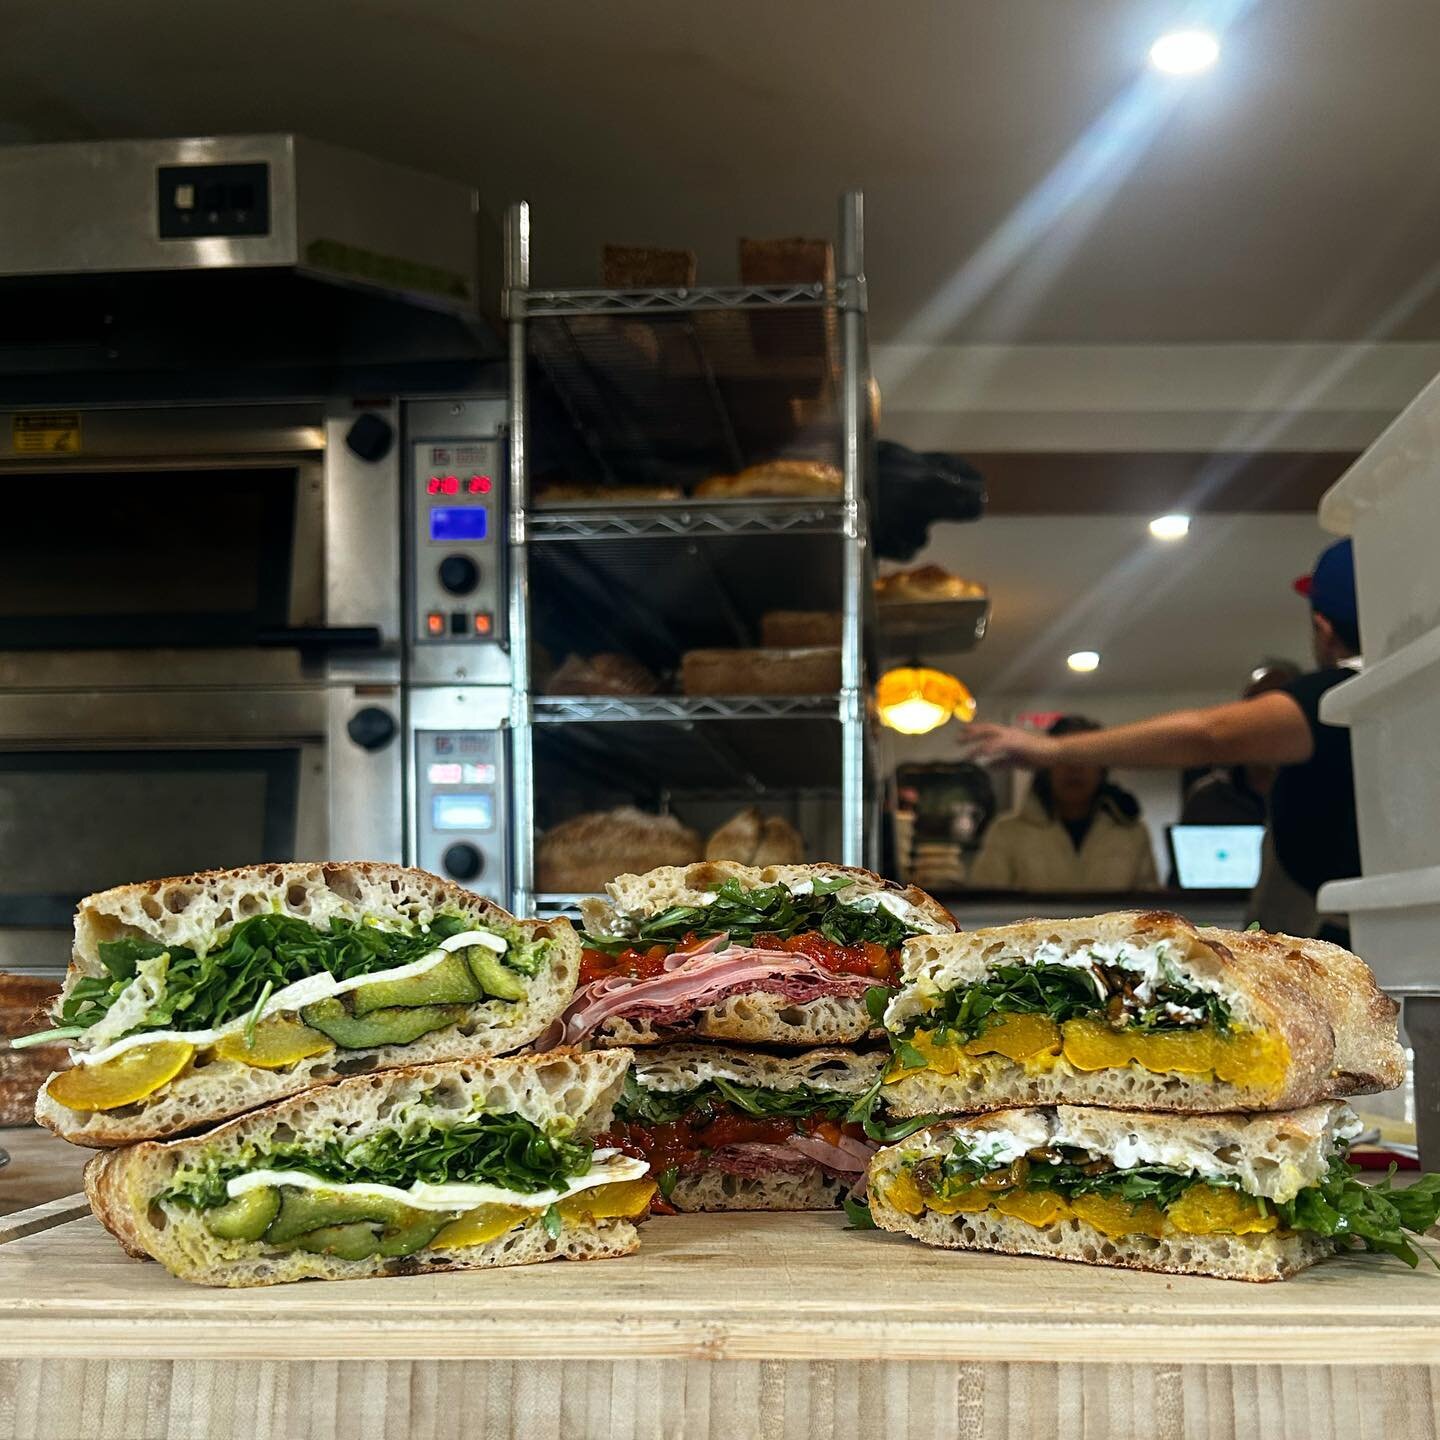 new sandwiches hitting the menu ! more veggie options as requested !! 

🥪delicata squash: roasted squash, arugula, whipped goats cheese, maple cayenne pepitas 

🥪deluxe: mortadella, mild salami, roasted peppers, ricotta, arugula, balsamic 

🥪zucch